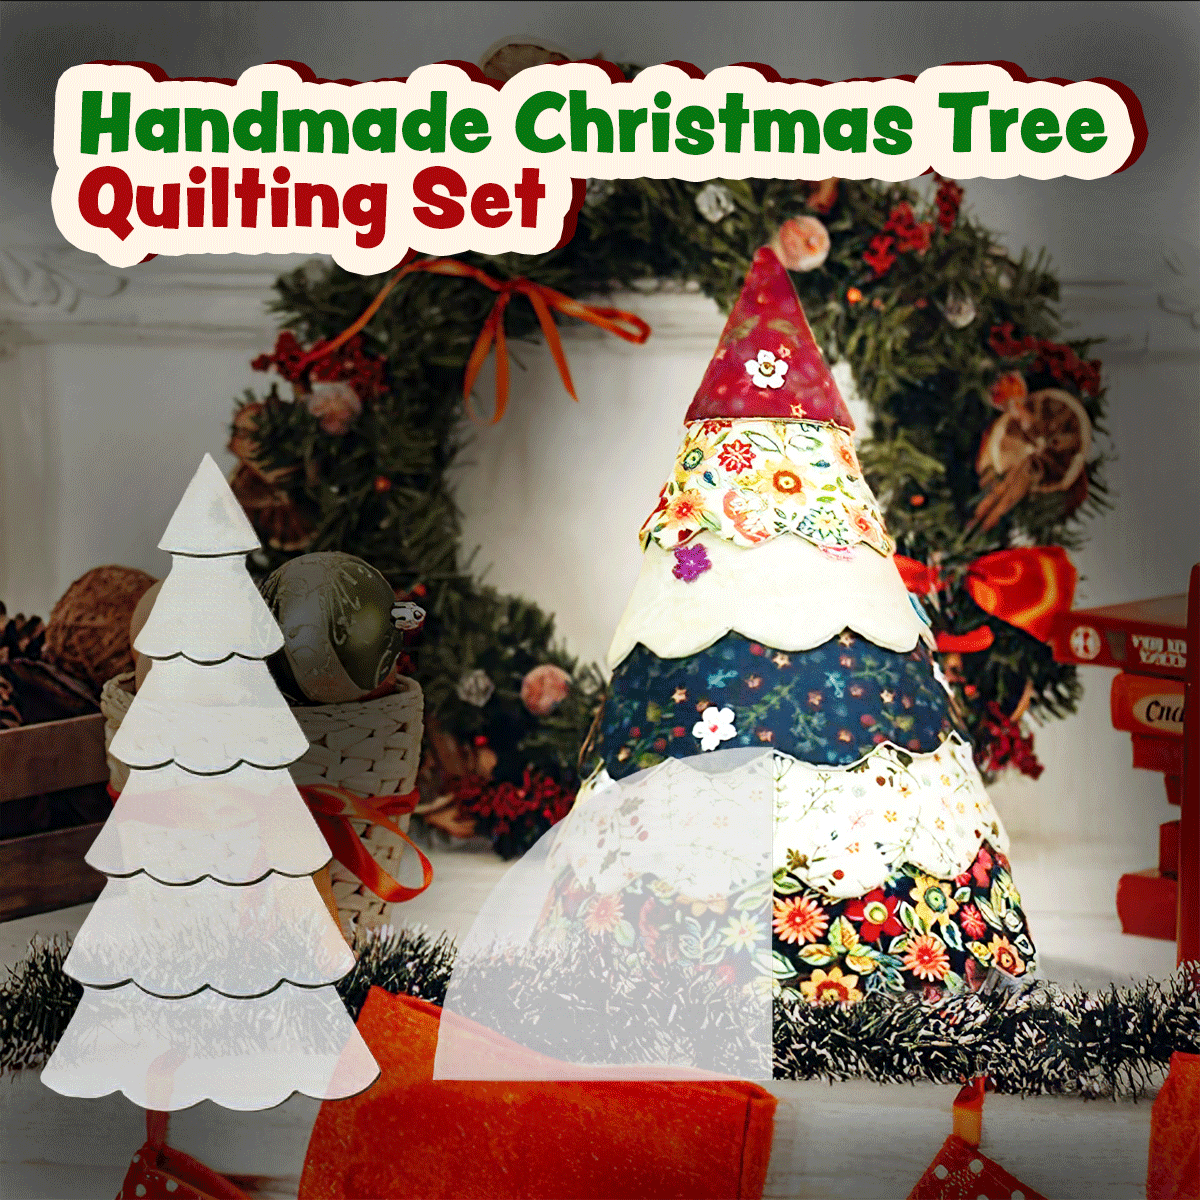 Handmade Christmas Tree Quilting Set With Tutorial